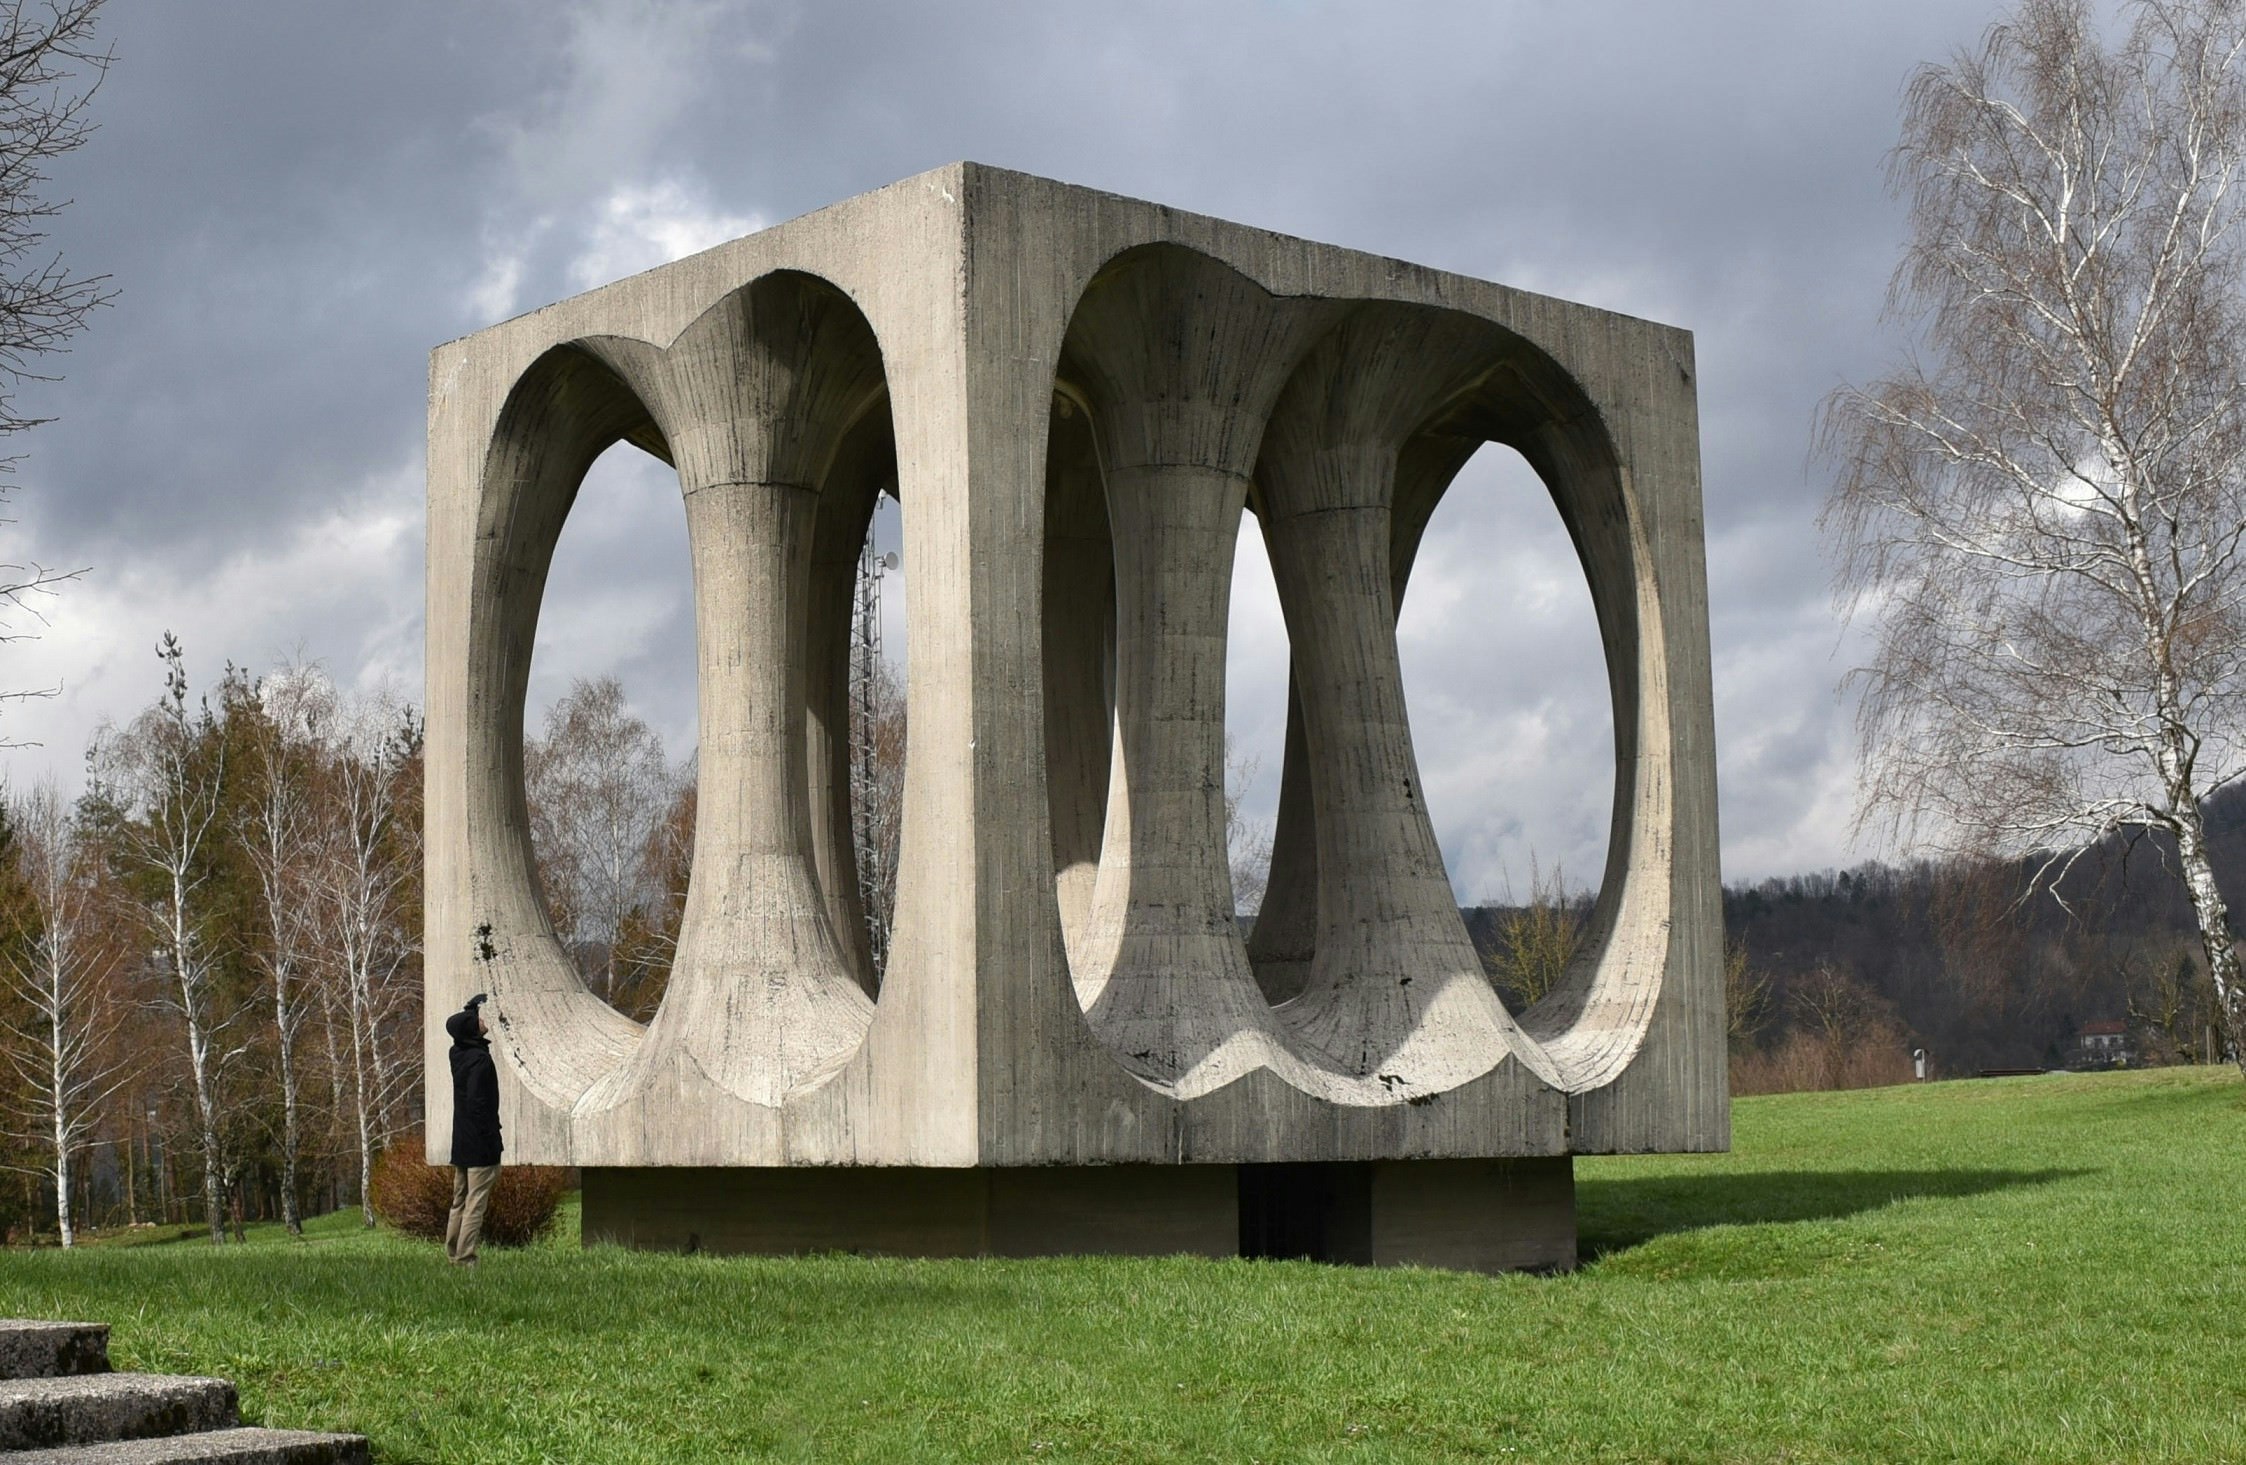 A monument in the town of Ilirska Bistrica in Slovenia.